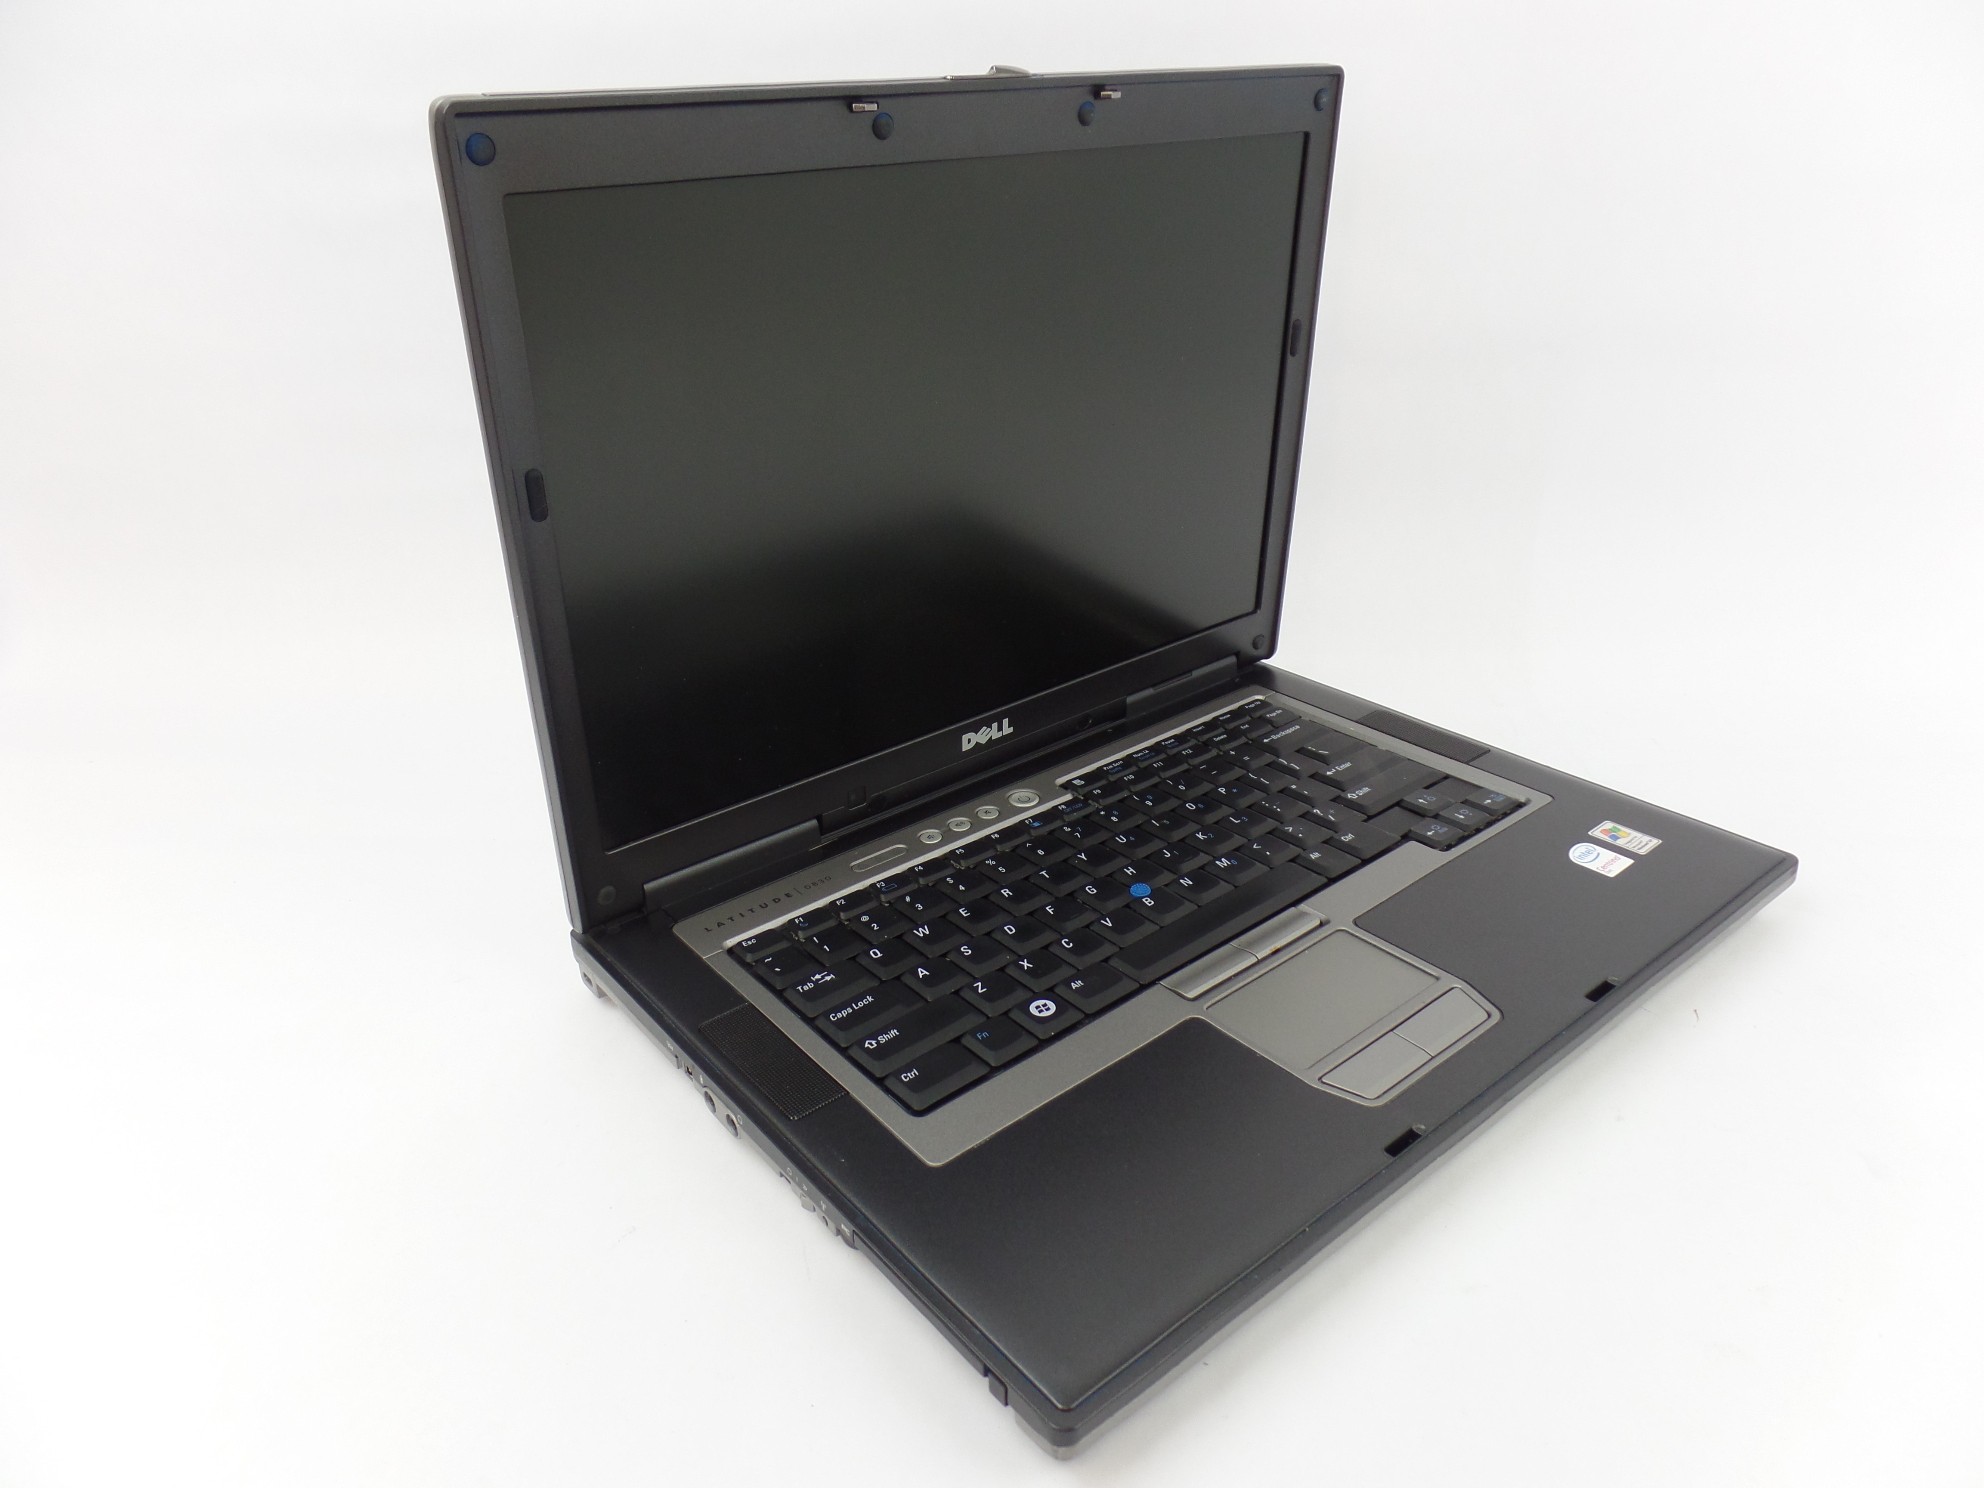 Dell Latitude D830 15.4" Core 2 Duo 1.8GHz 1GB No HDD Laptop Boots to BIOS